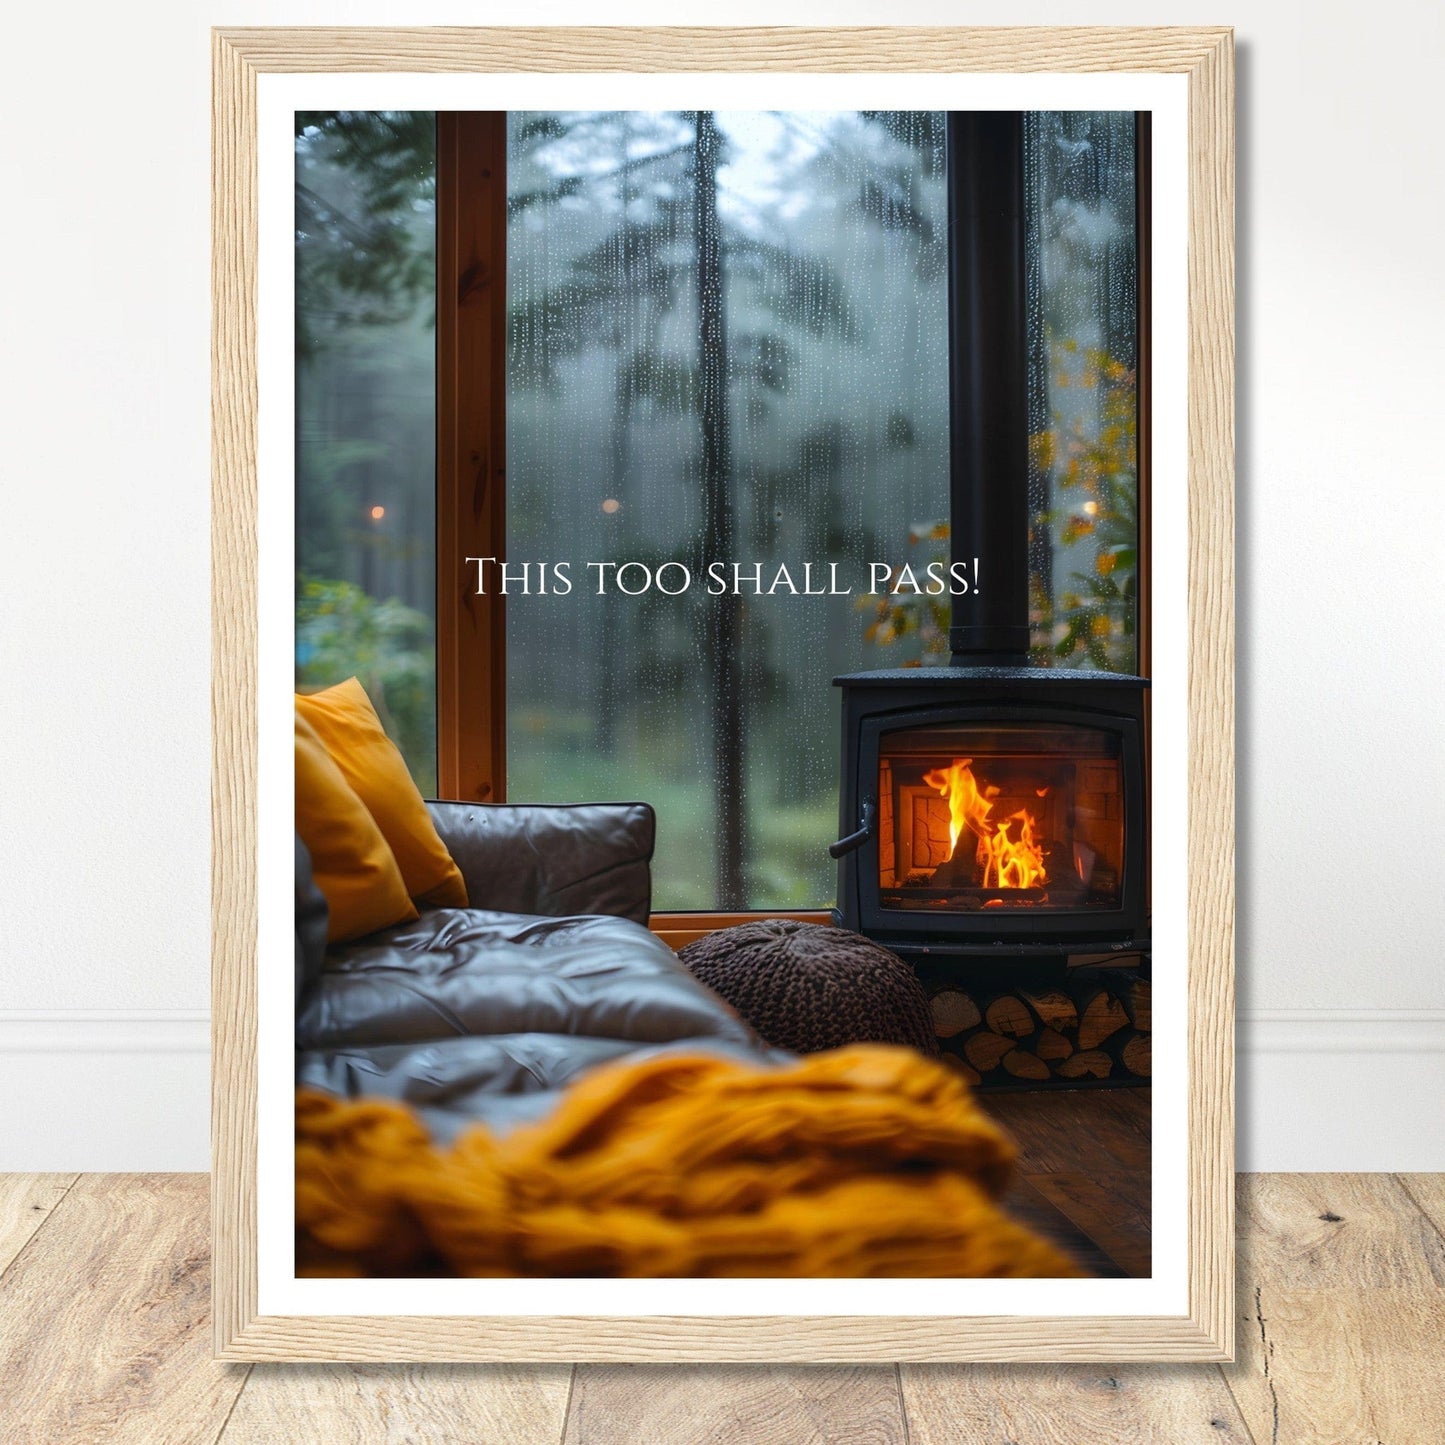 Coffee With My Father Print Material 30x40 cm / 12x16″ / Framed / Wood frame This Too Shall Pass - Custom Art